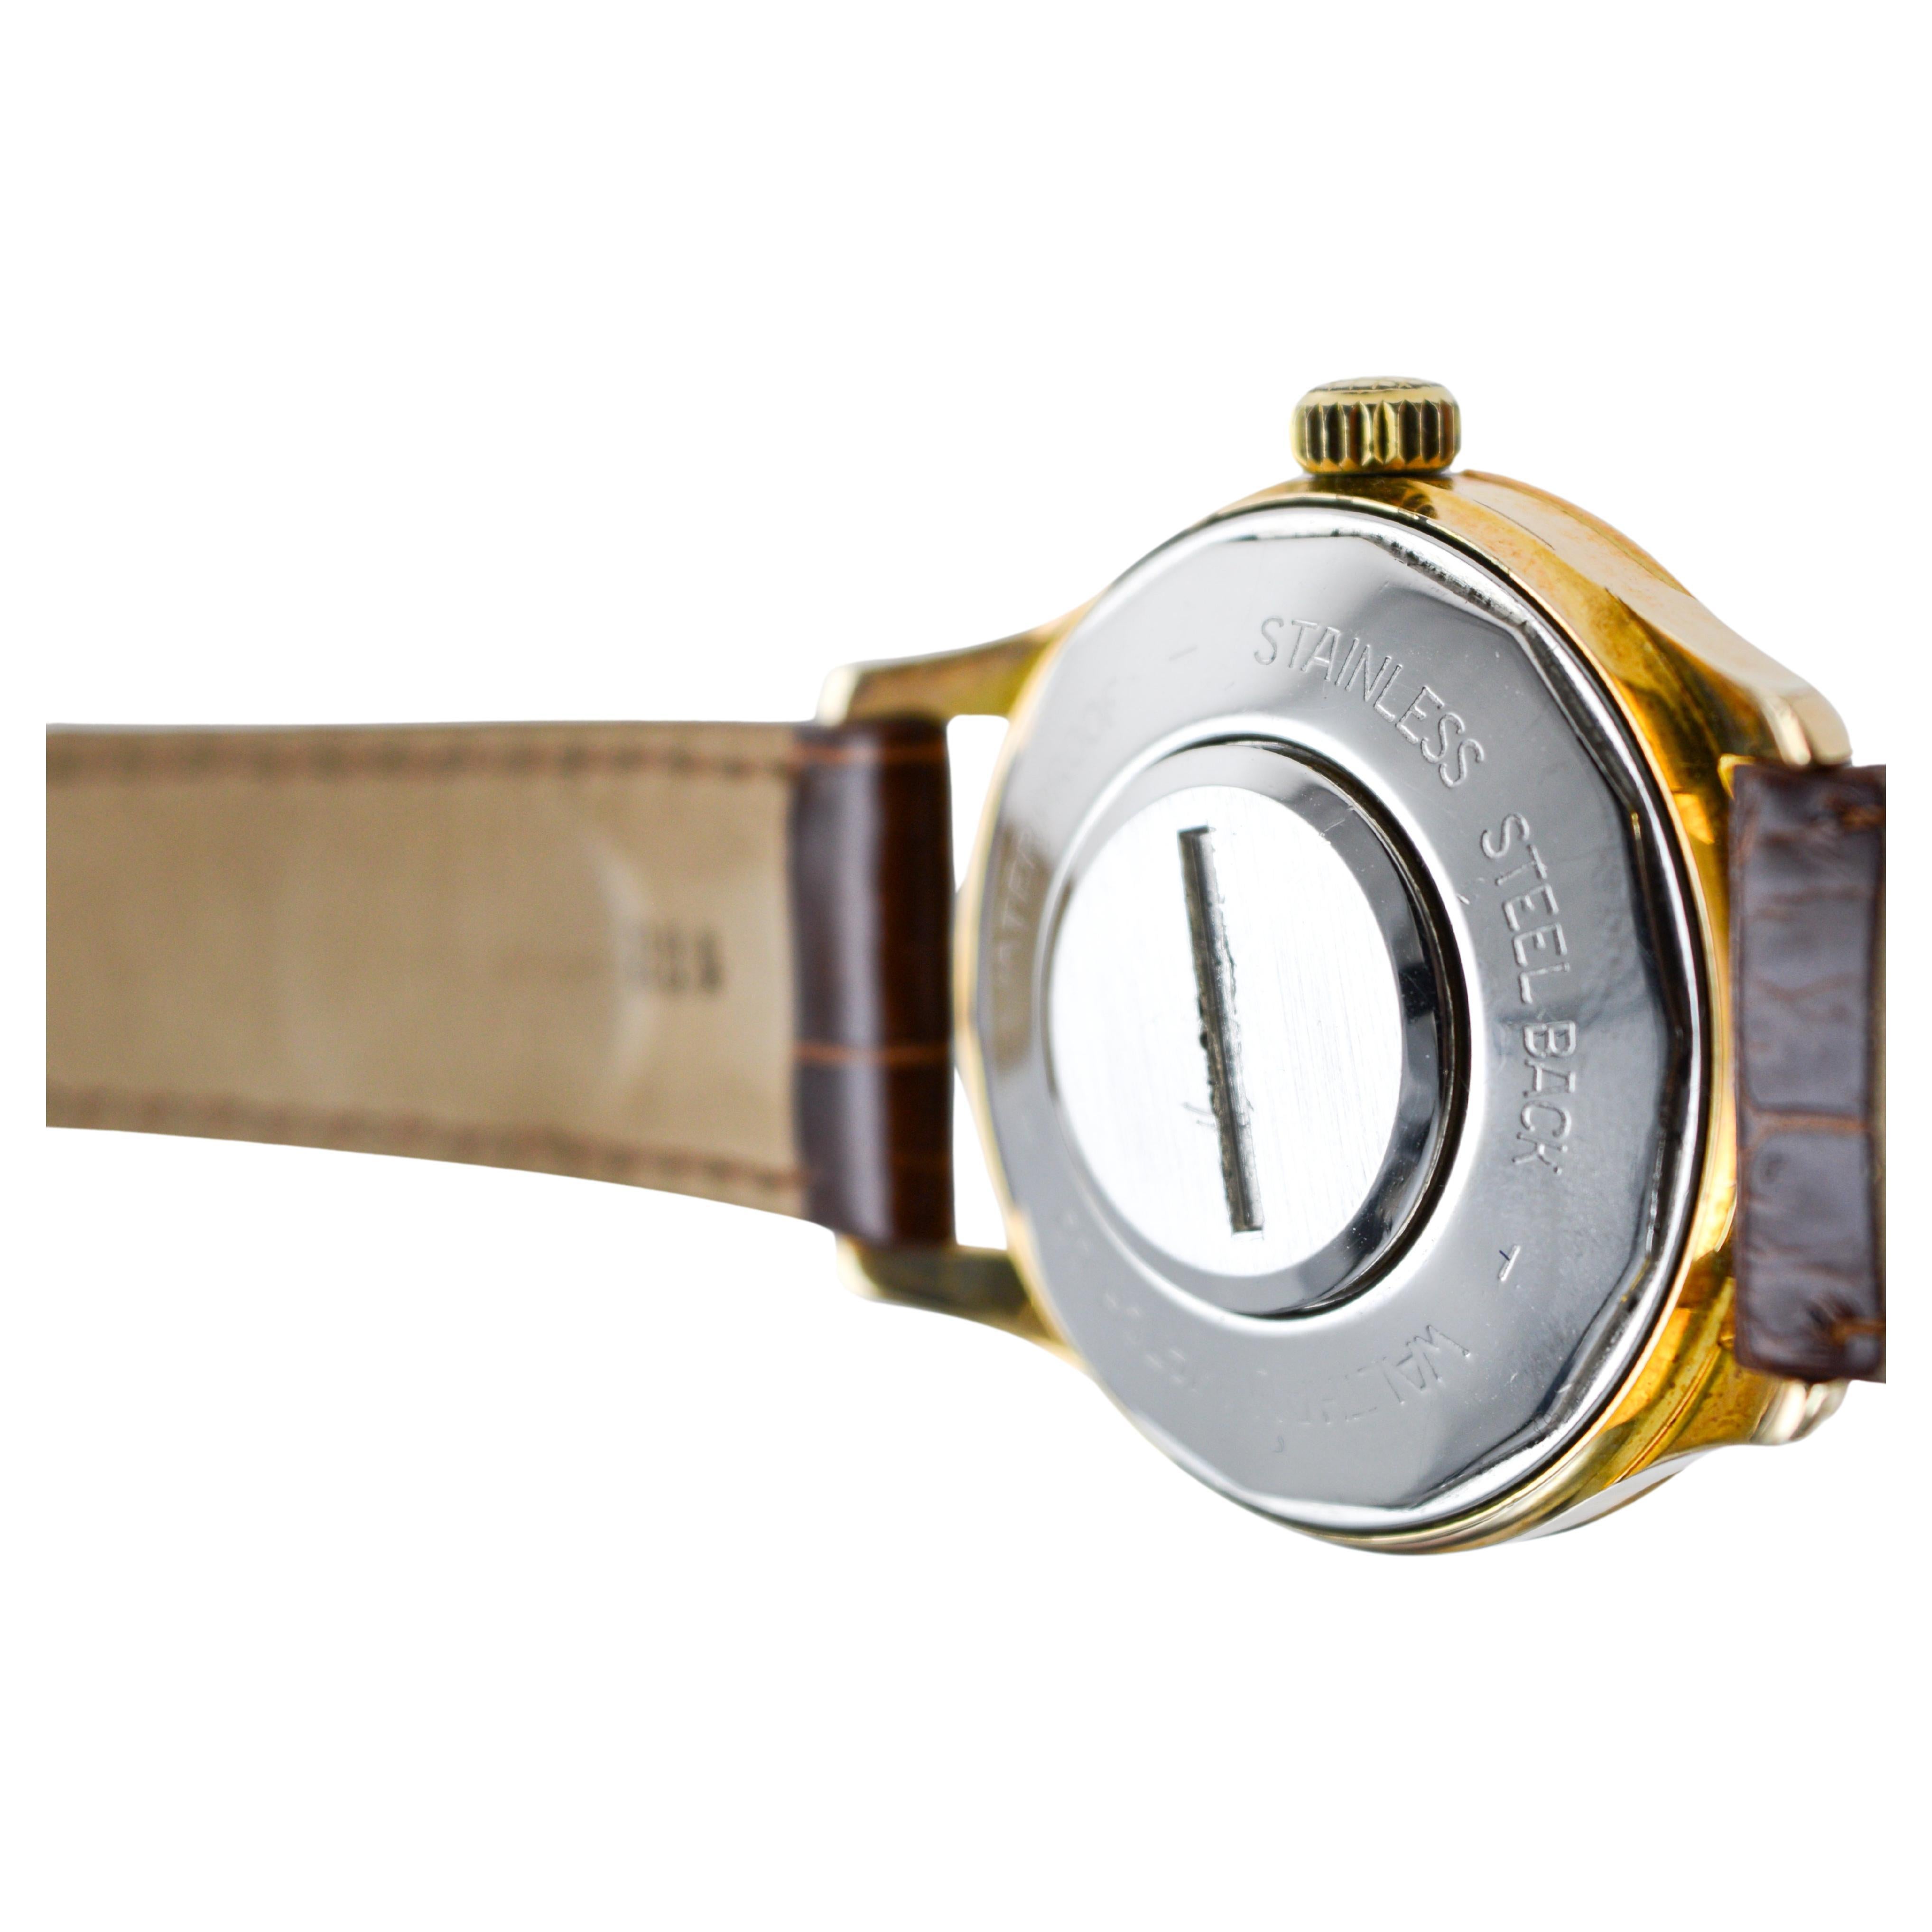 Waltham Yellow Gold Filled Mid Century Experimental Electromechanical Watch For Sale 6